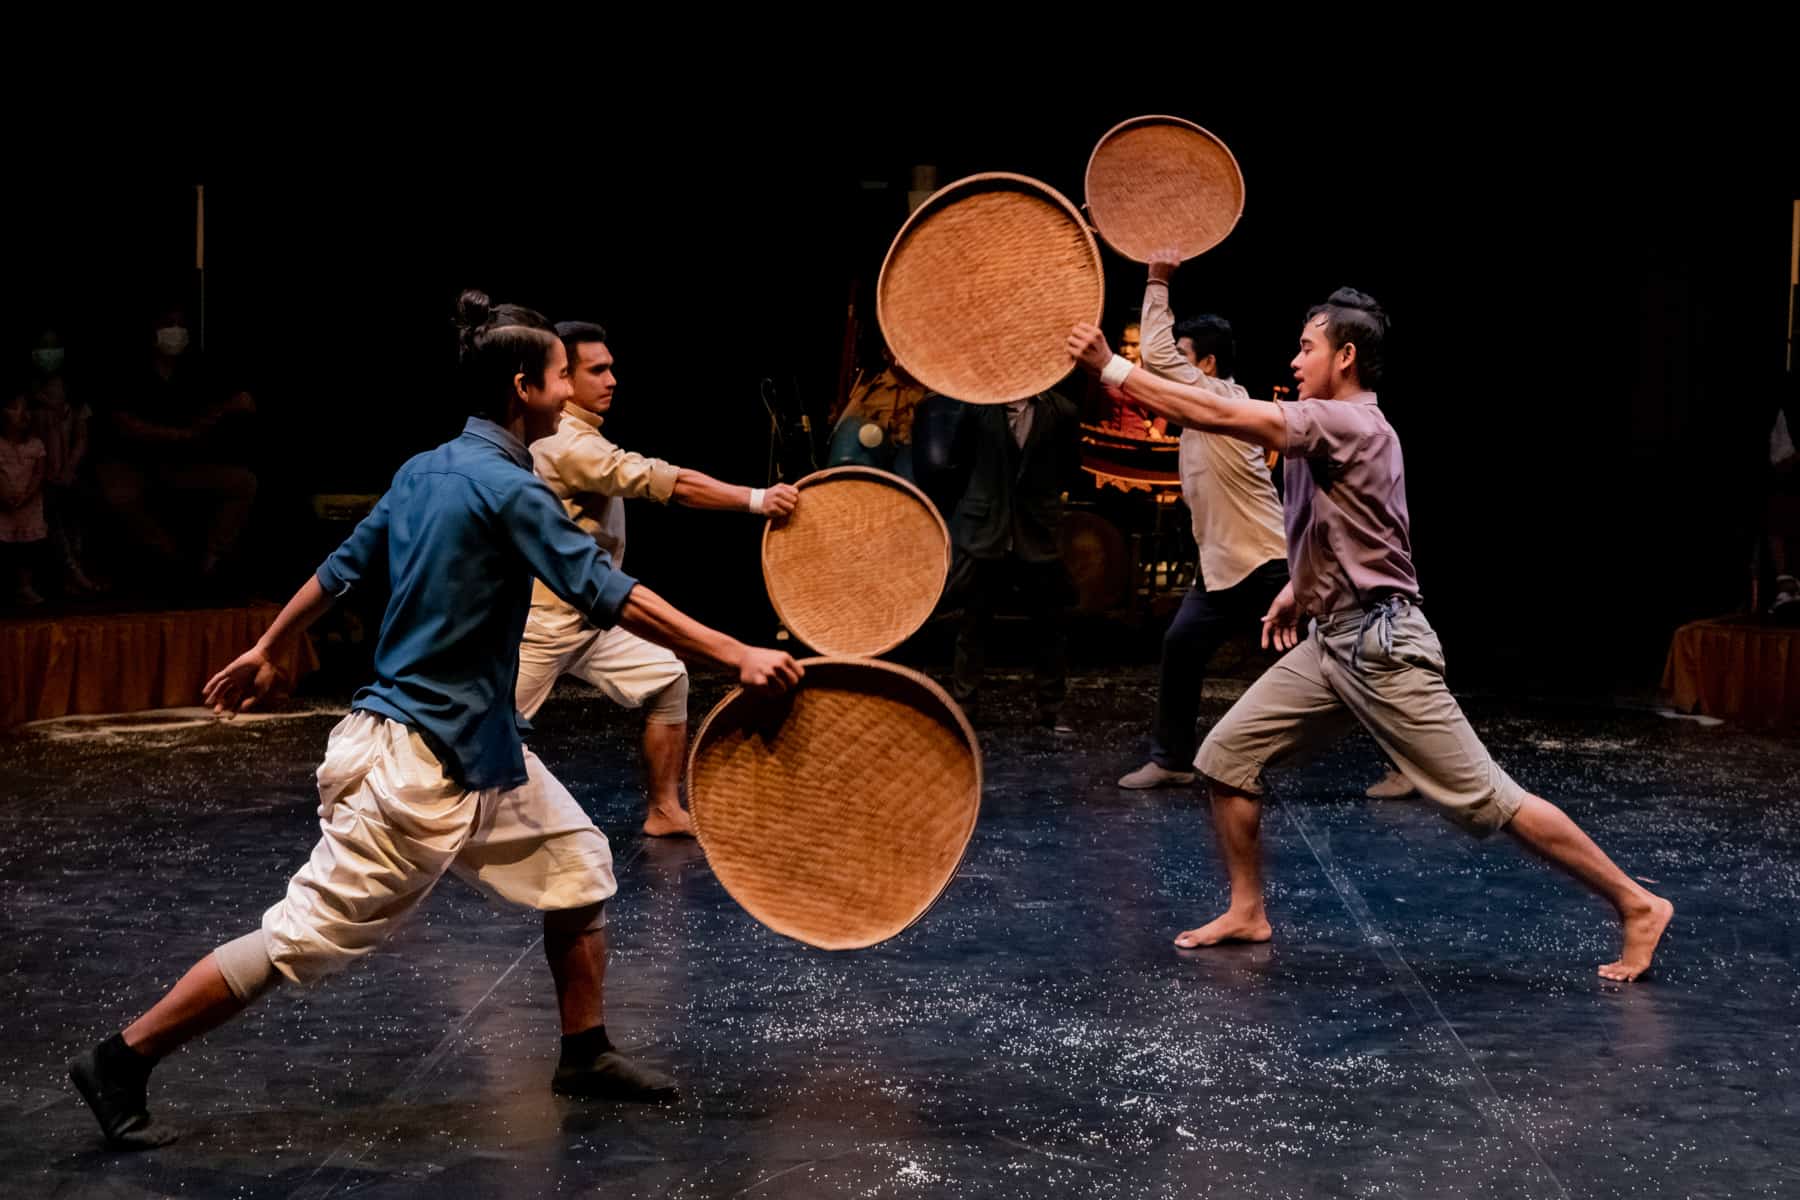 Four men perform a dance with woven rice trays in the Siem Reap Circus. The lighting in dark and musicians can be seen in the background. 